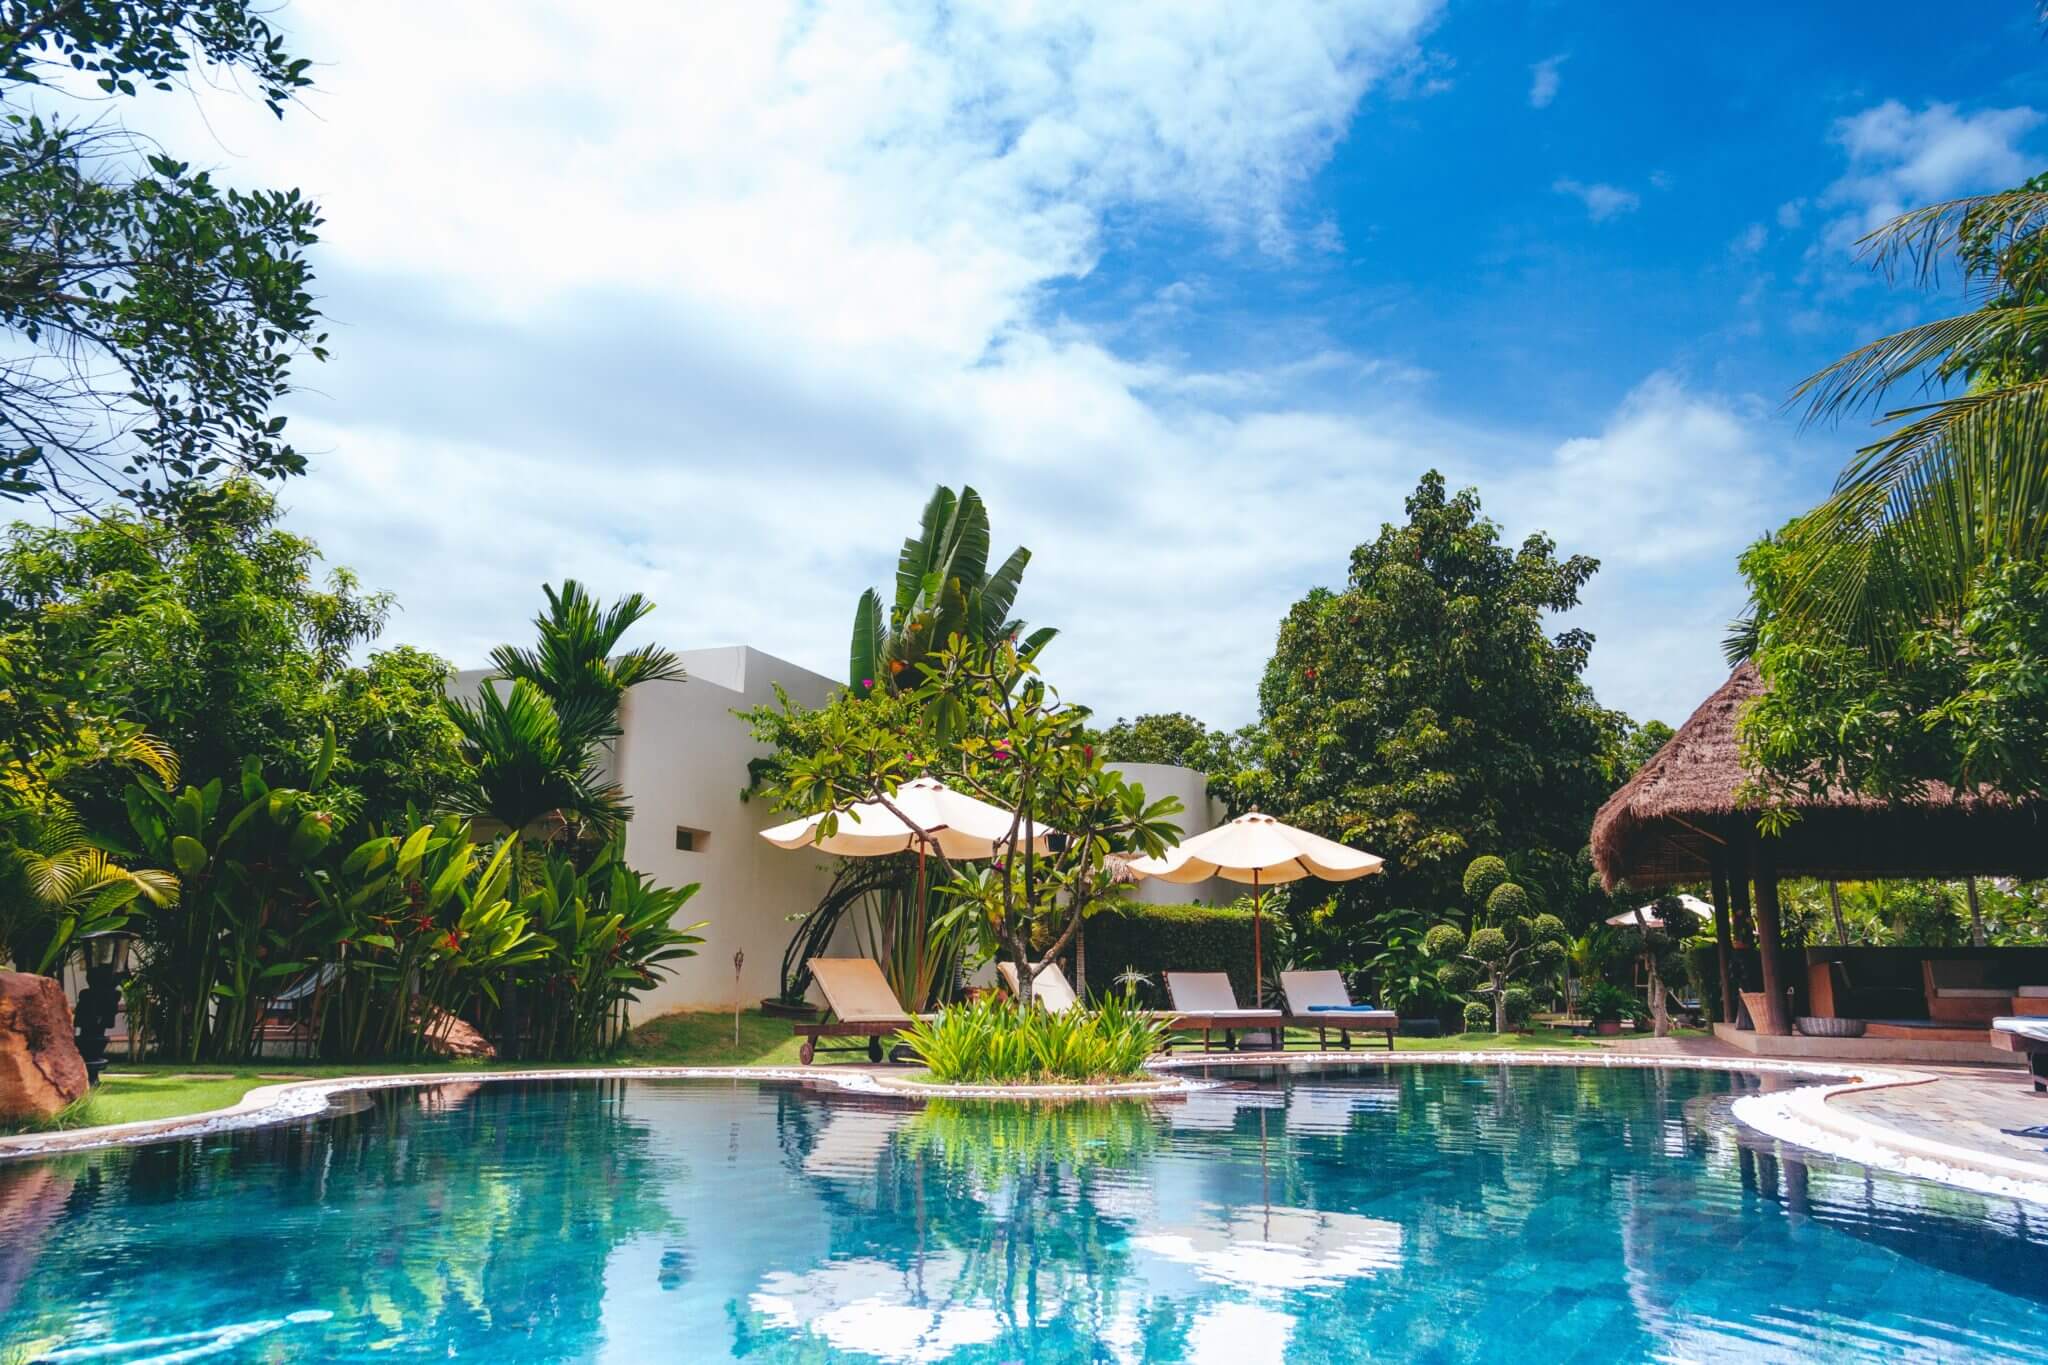 Our recommendations for the best hotels in Siem Reap, Cambodia. Siem Reap hostels, Siem reap boutique hotels and Siem Reap Villas for groups and events too. 